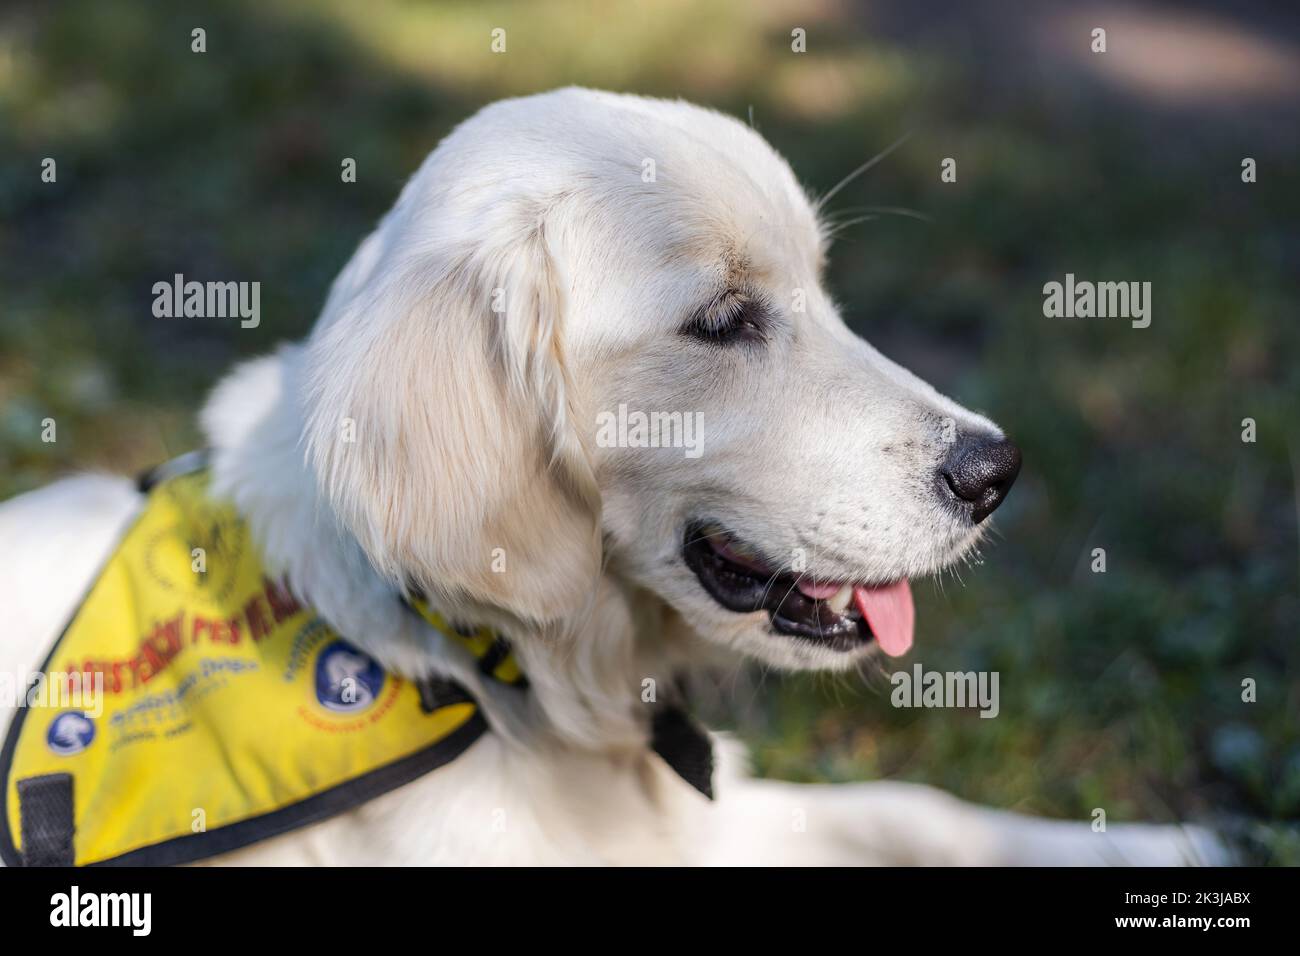 Young service dog (assistance dog) laying in the grass in its vest. Cream colored golden retriever with its tongue hanging out. Stock Photo